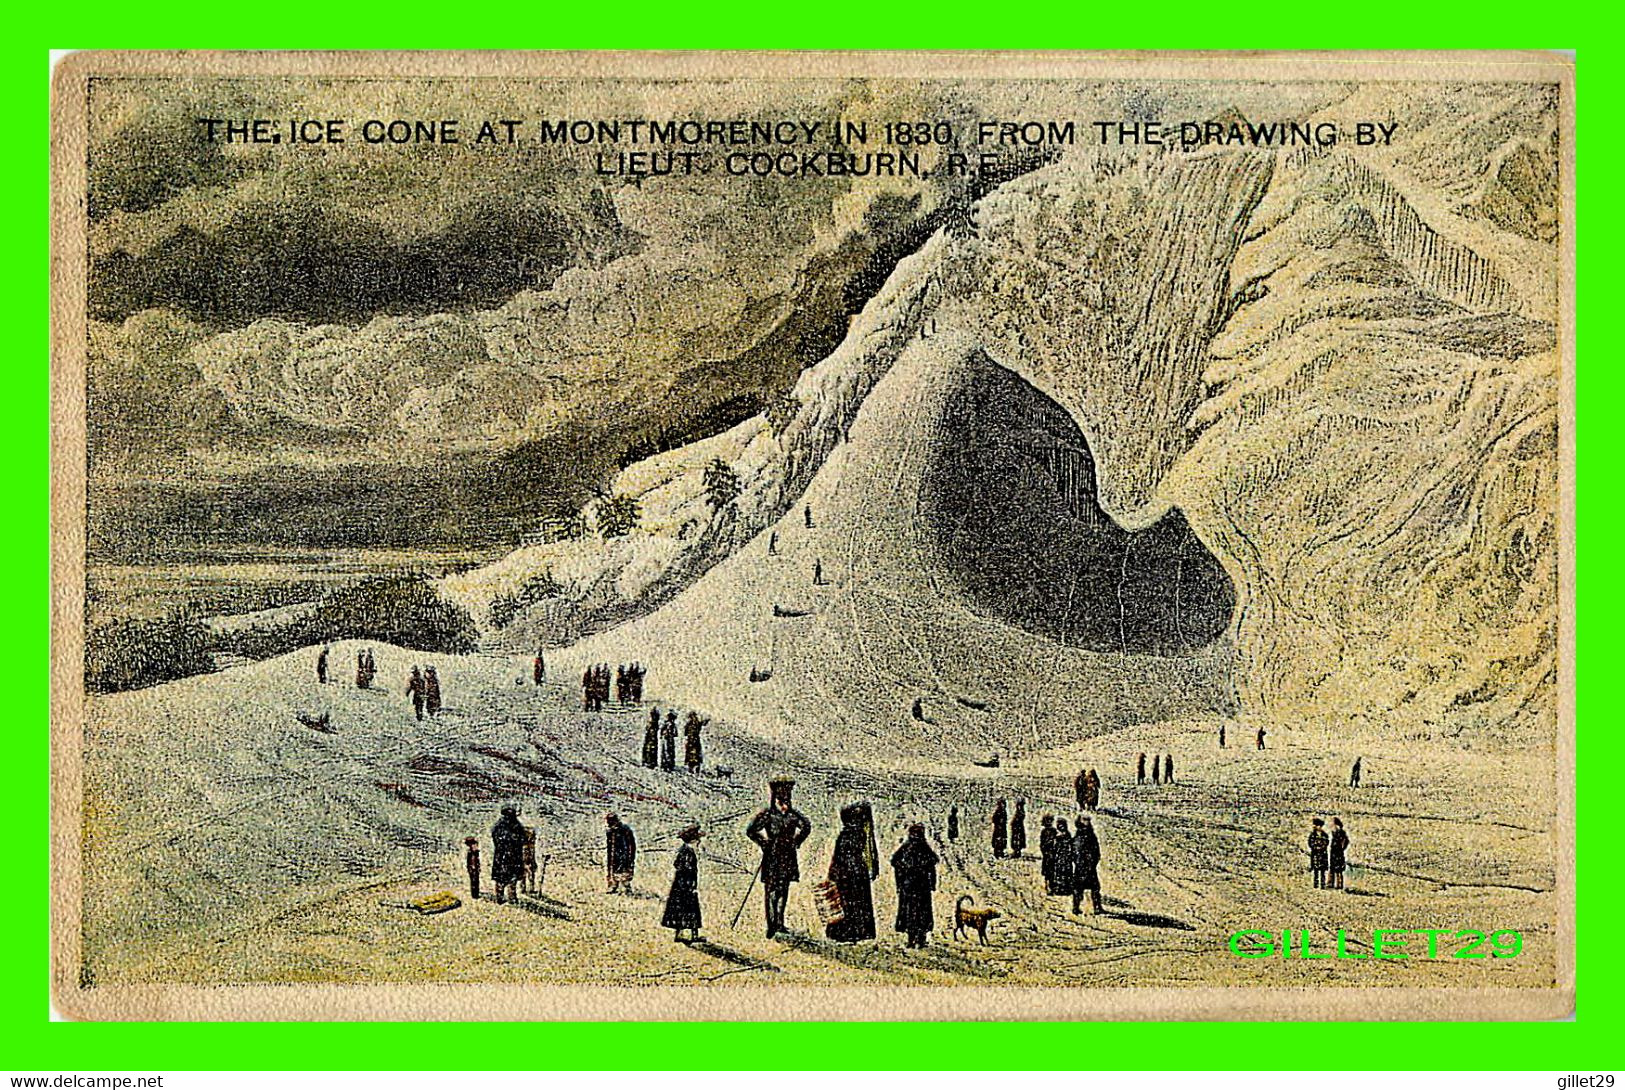 MONTMORENCY, QUÉBEC - THE ICE CONE AT MONTMORENCY IN 1830 FROM THE DRAWING BY LIEUT. COCKBURN, R.E. - MORTIMER CO - - Montmorency Falls